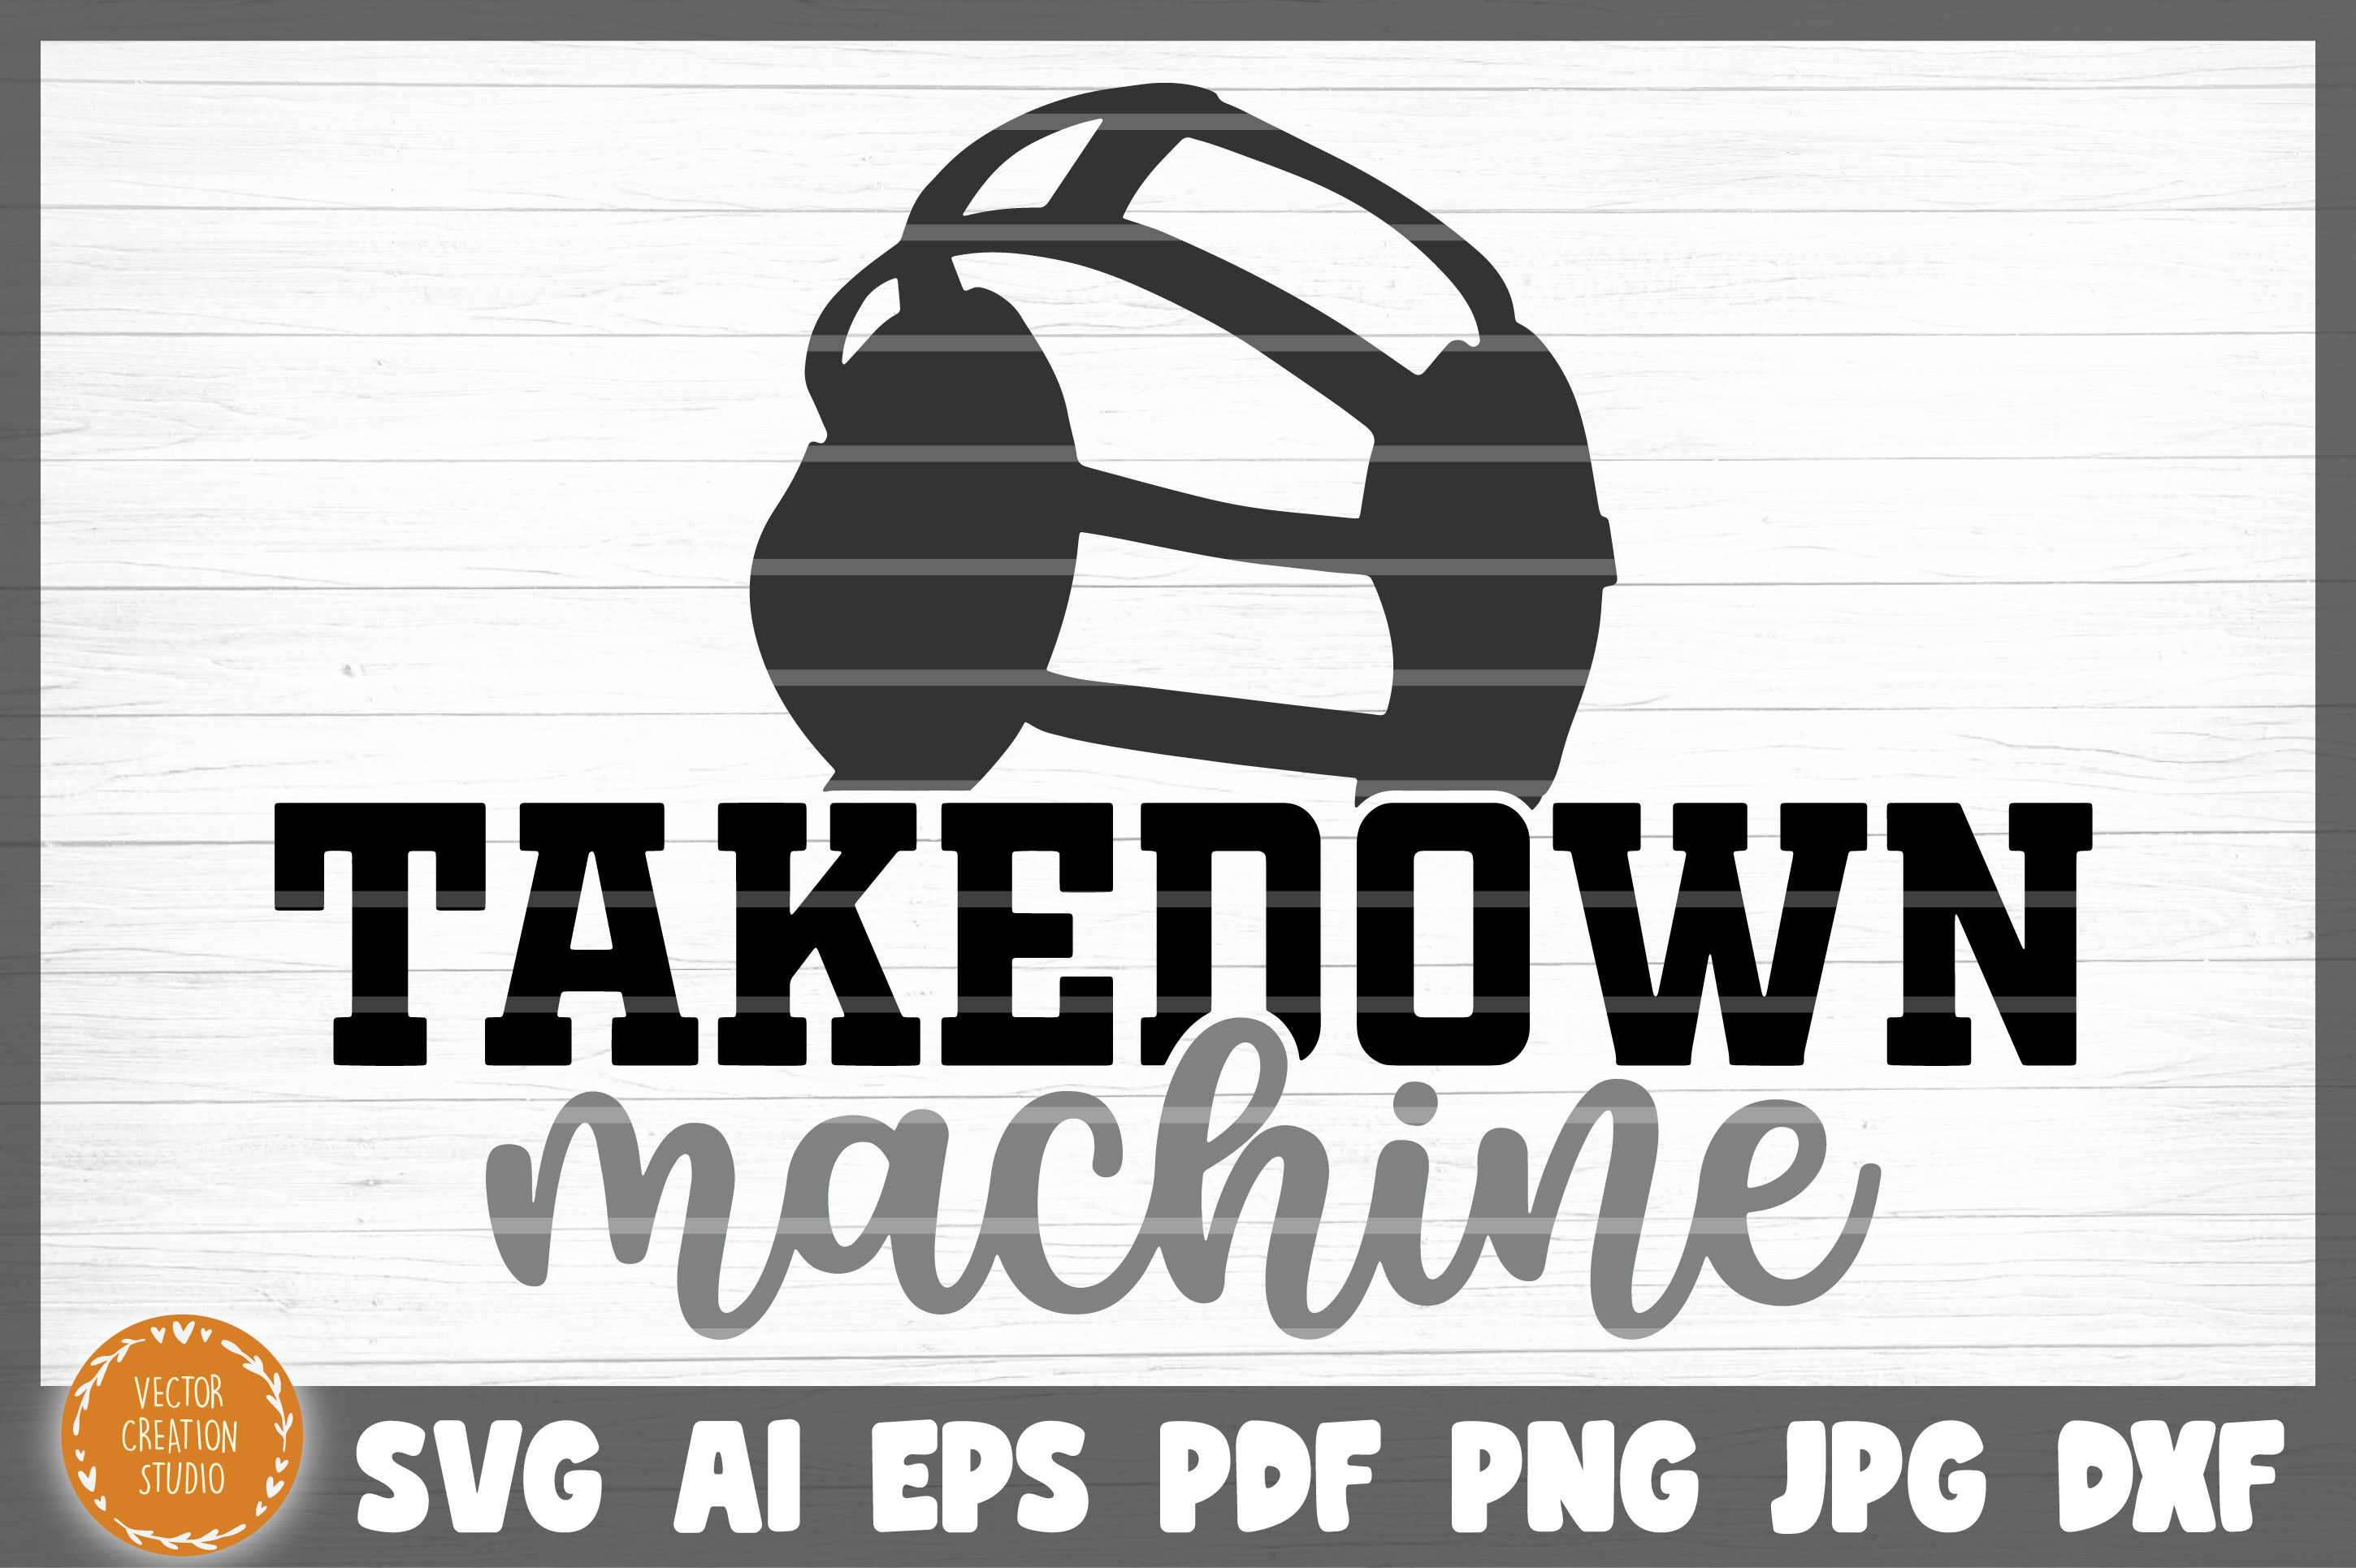 Download Wrestling Takedown Machine Svg Cut File By Vectorcreationstudio Thehungryjpeg Com